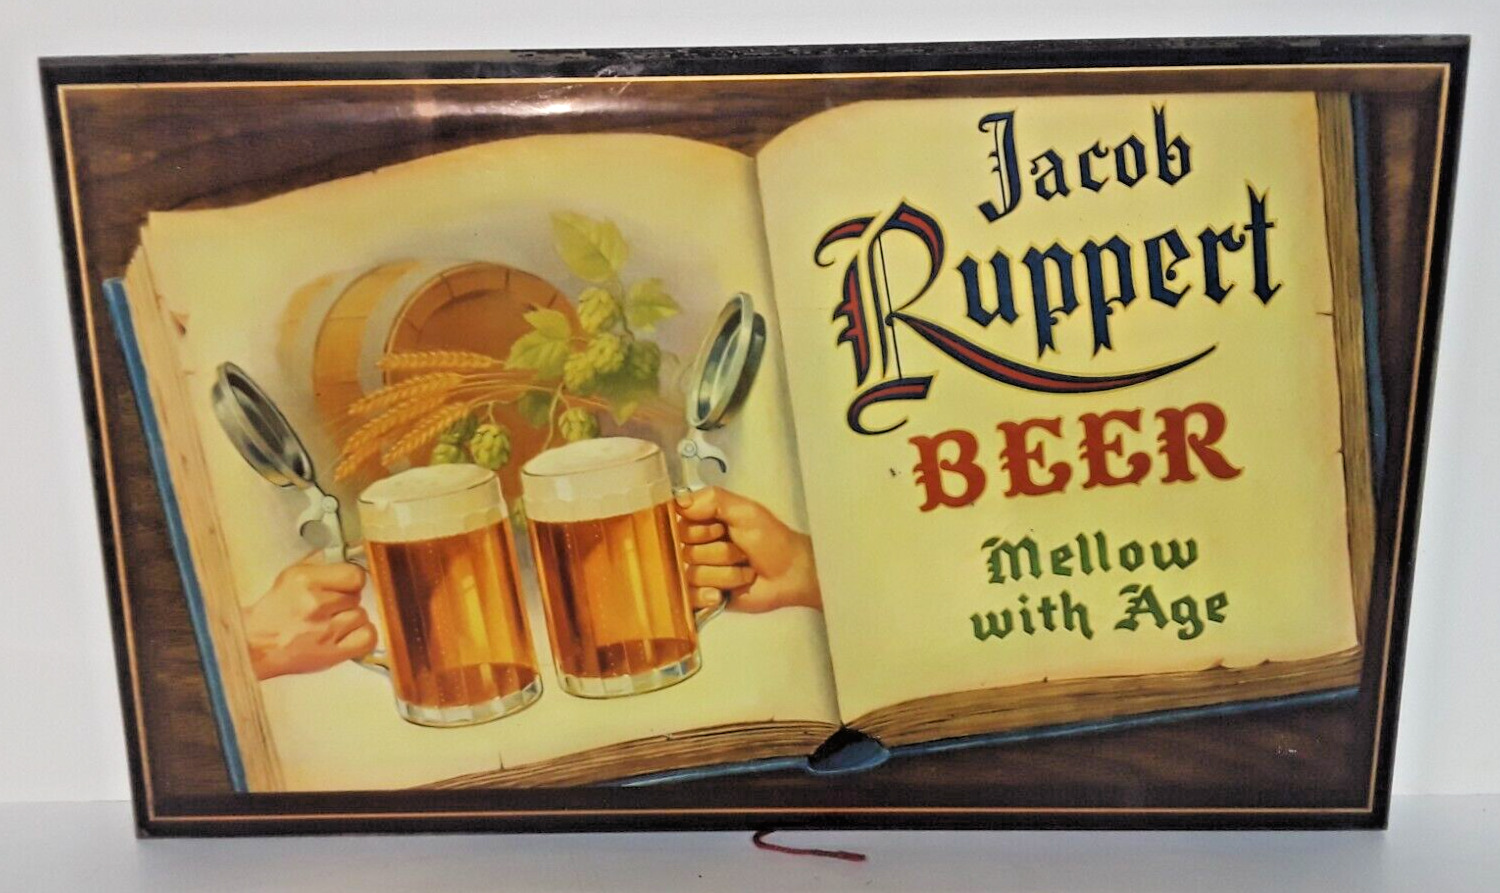 RARE VTG JACOB RUPPERT BEER MELLOW WITH AGE GLASSOLOID WOOD PLAQUE SIGN NEW YORK